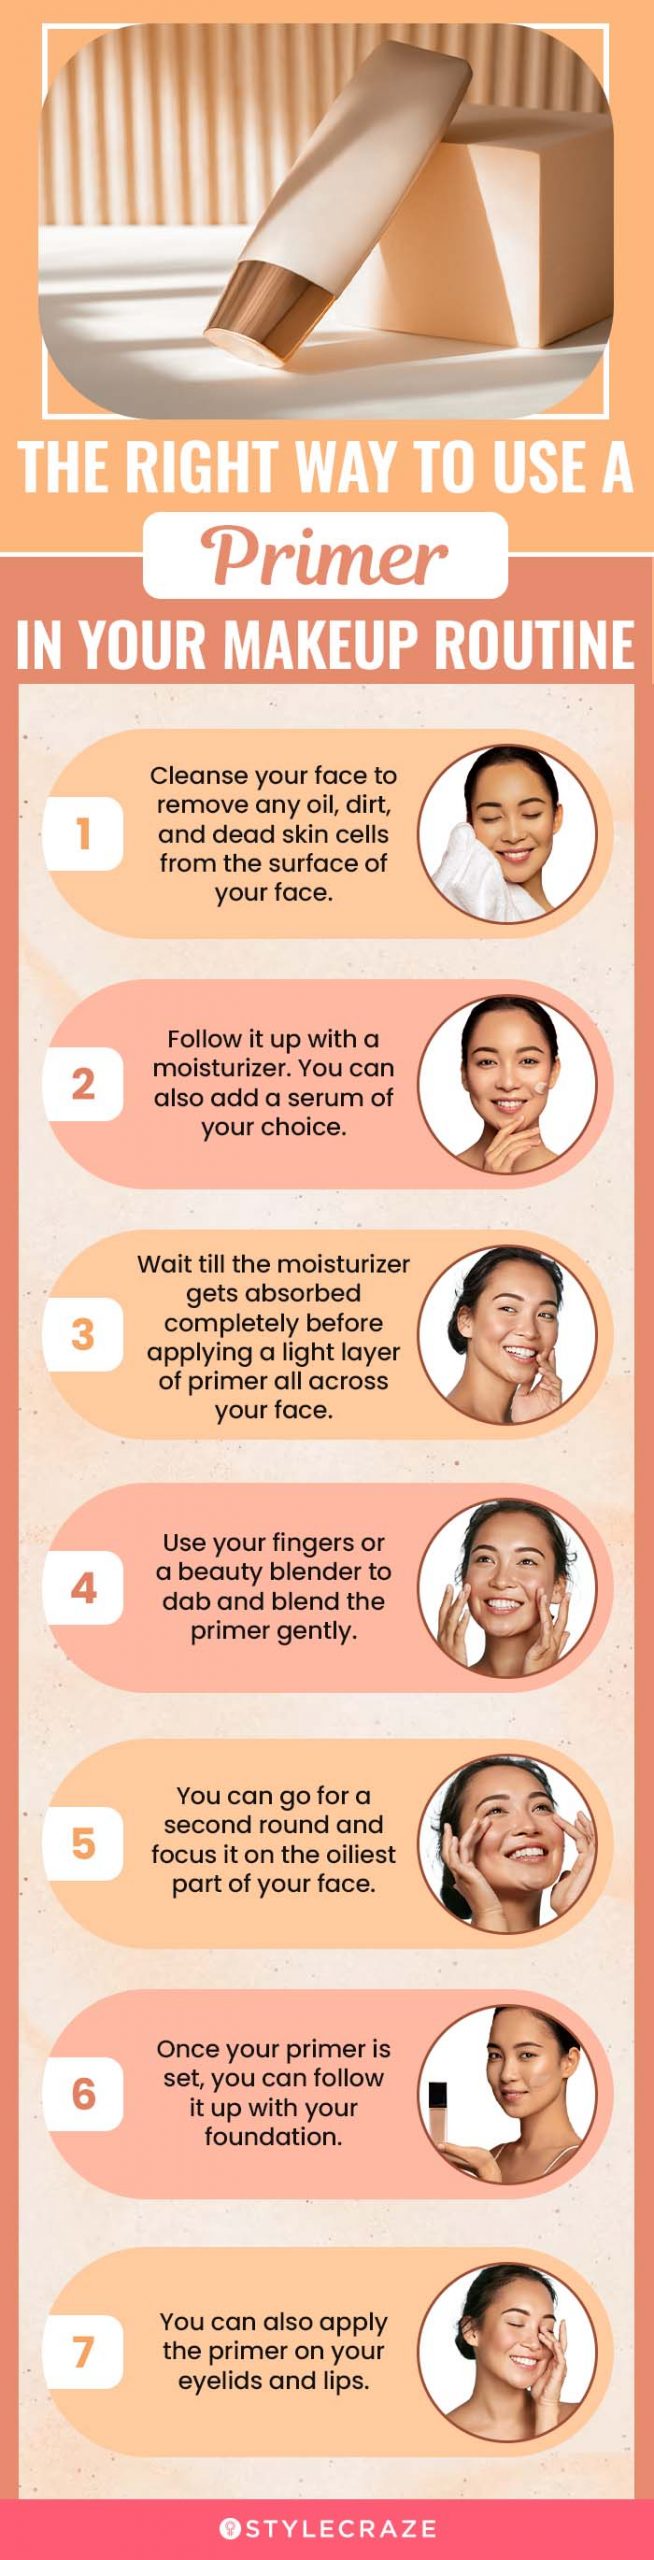 The Right Way To Use A Primer In Your Makeup Routine (infographic)